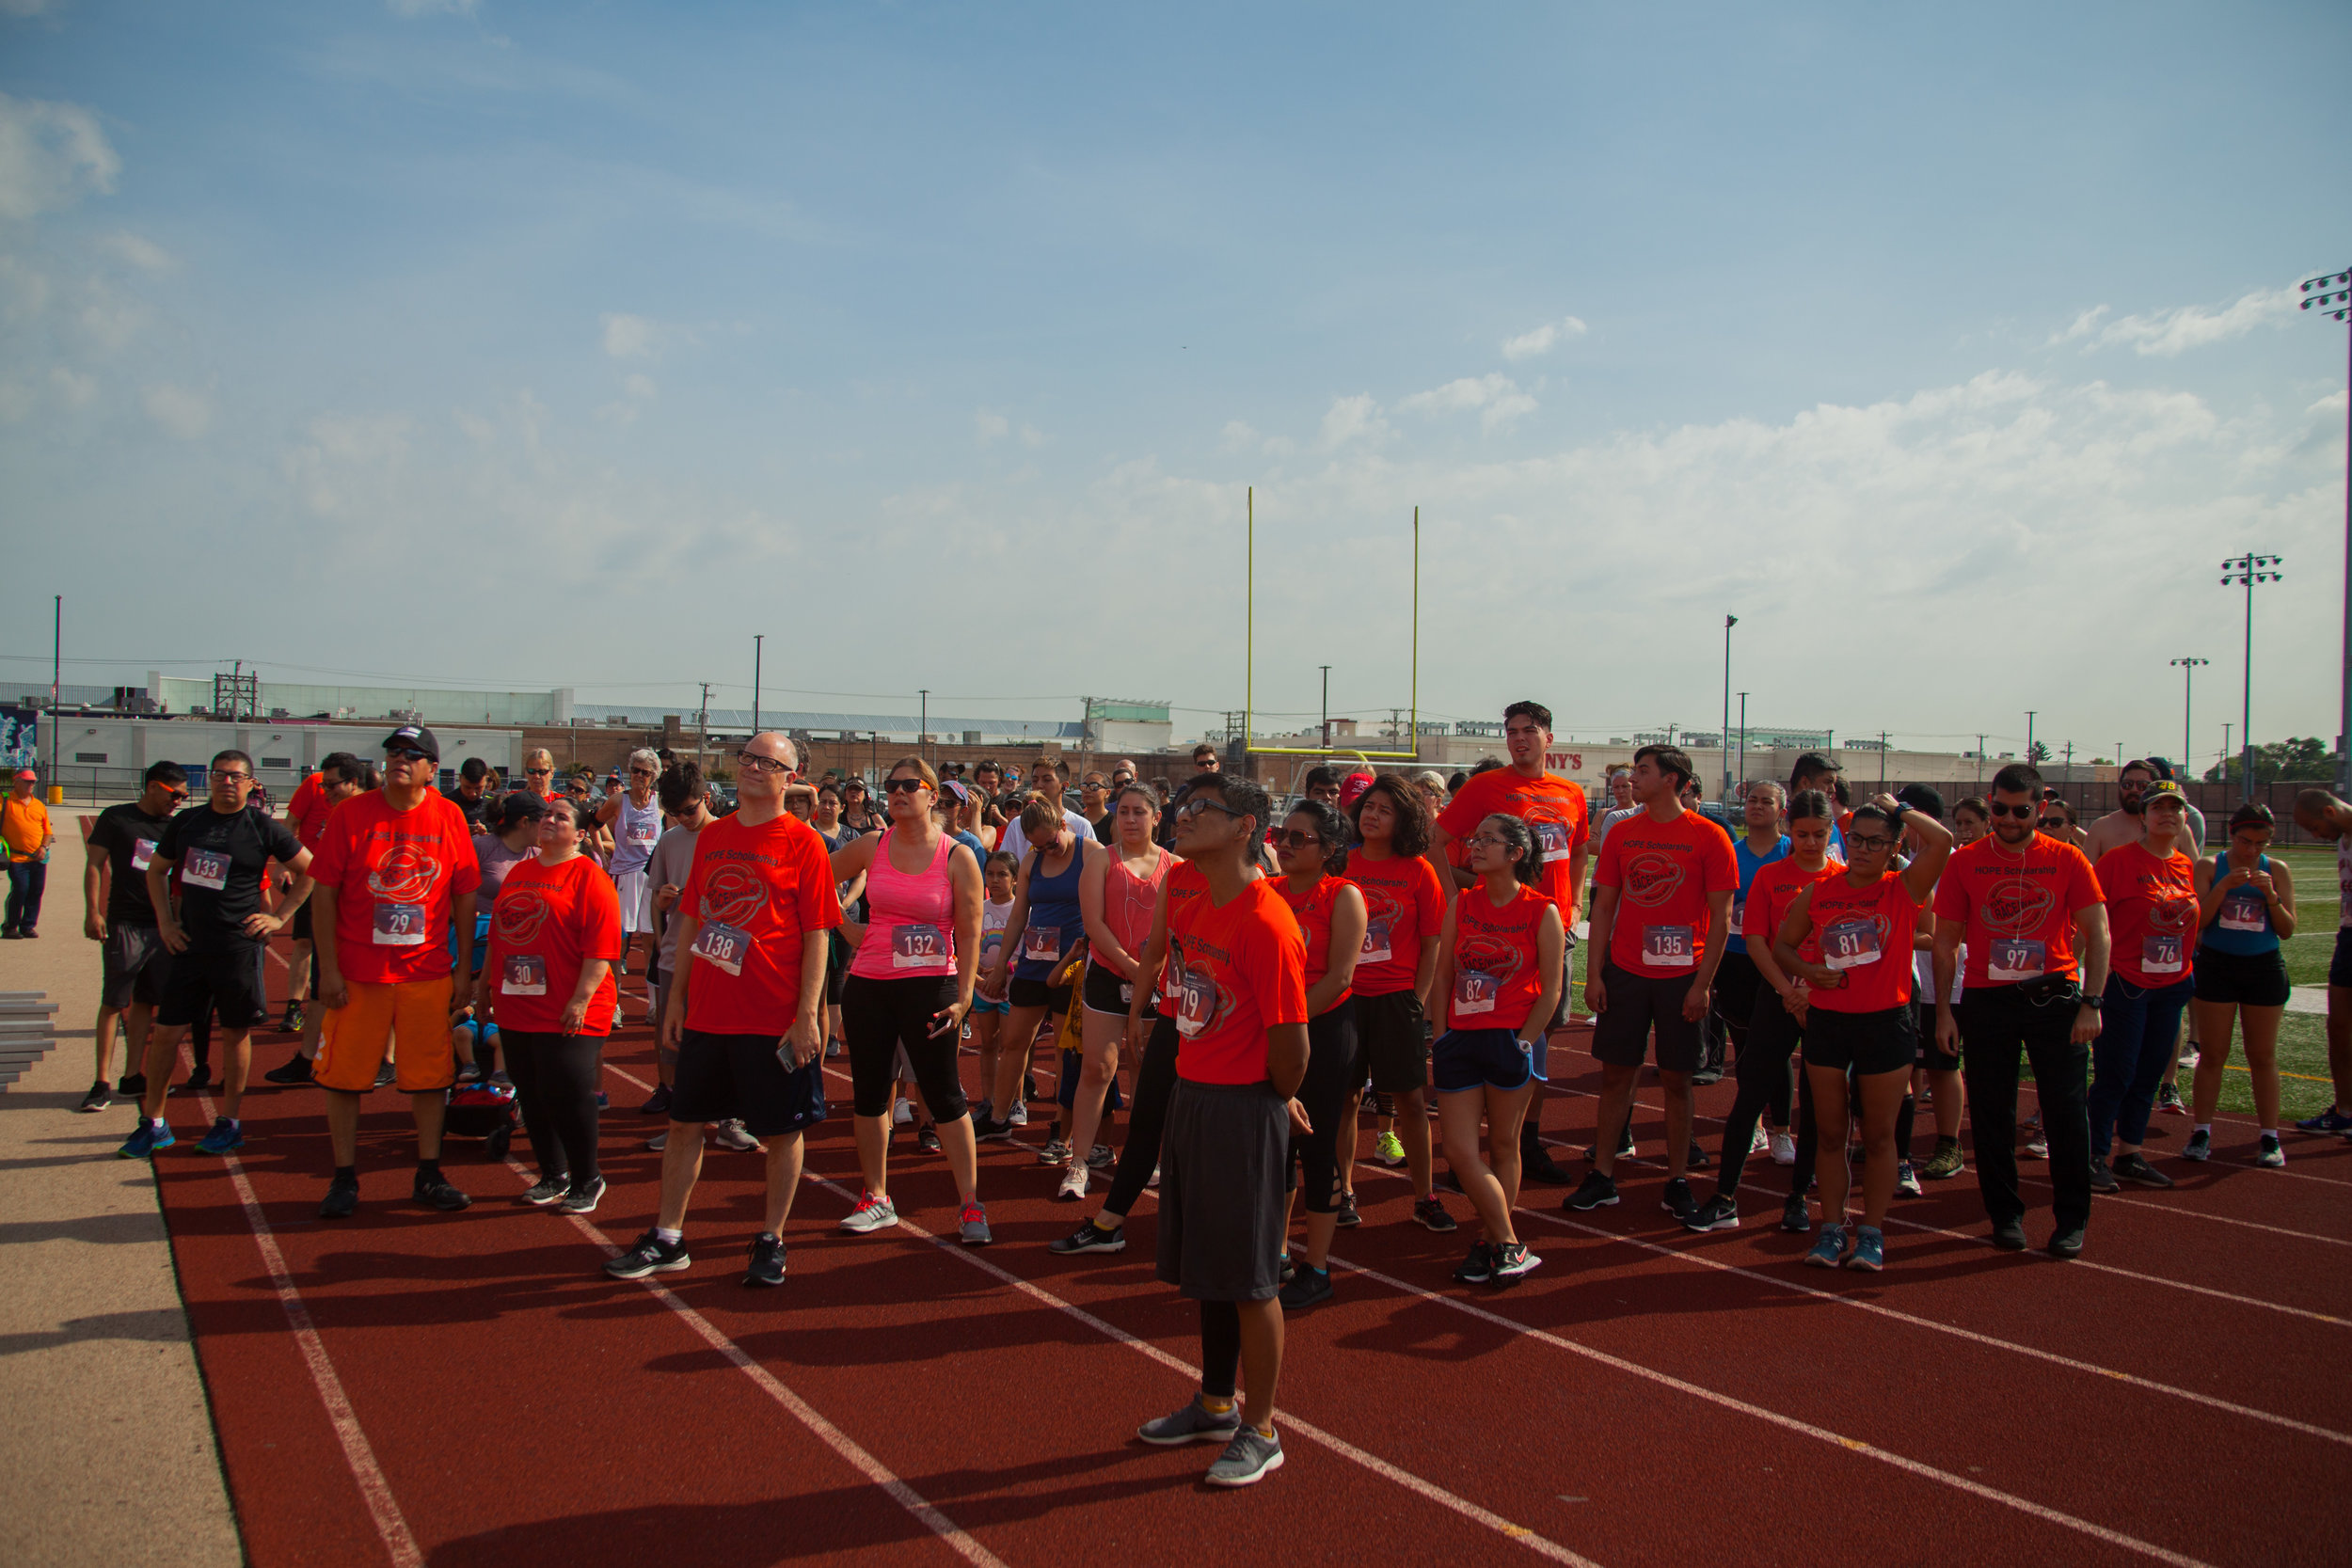  Over 100 people participated in the 5k run. They ran around the Morton West High School campus. Afterwards sponsors provided water and other snacks.     